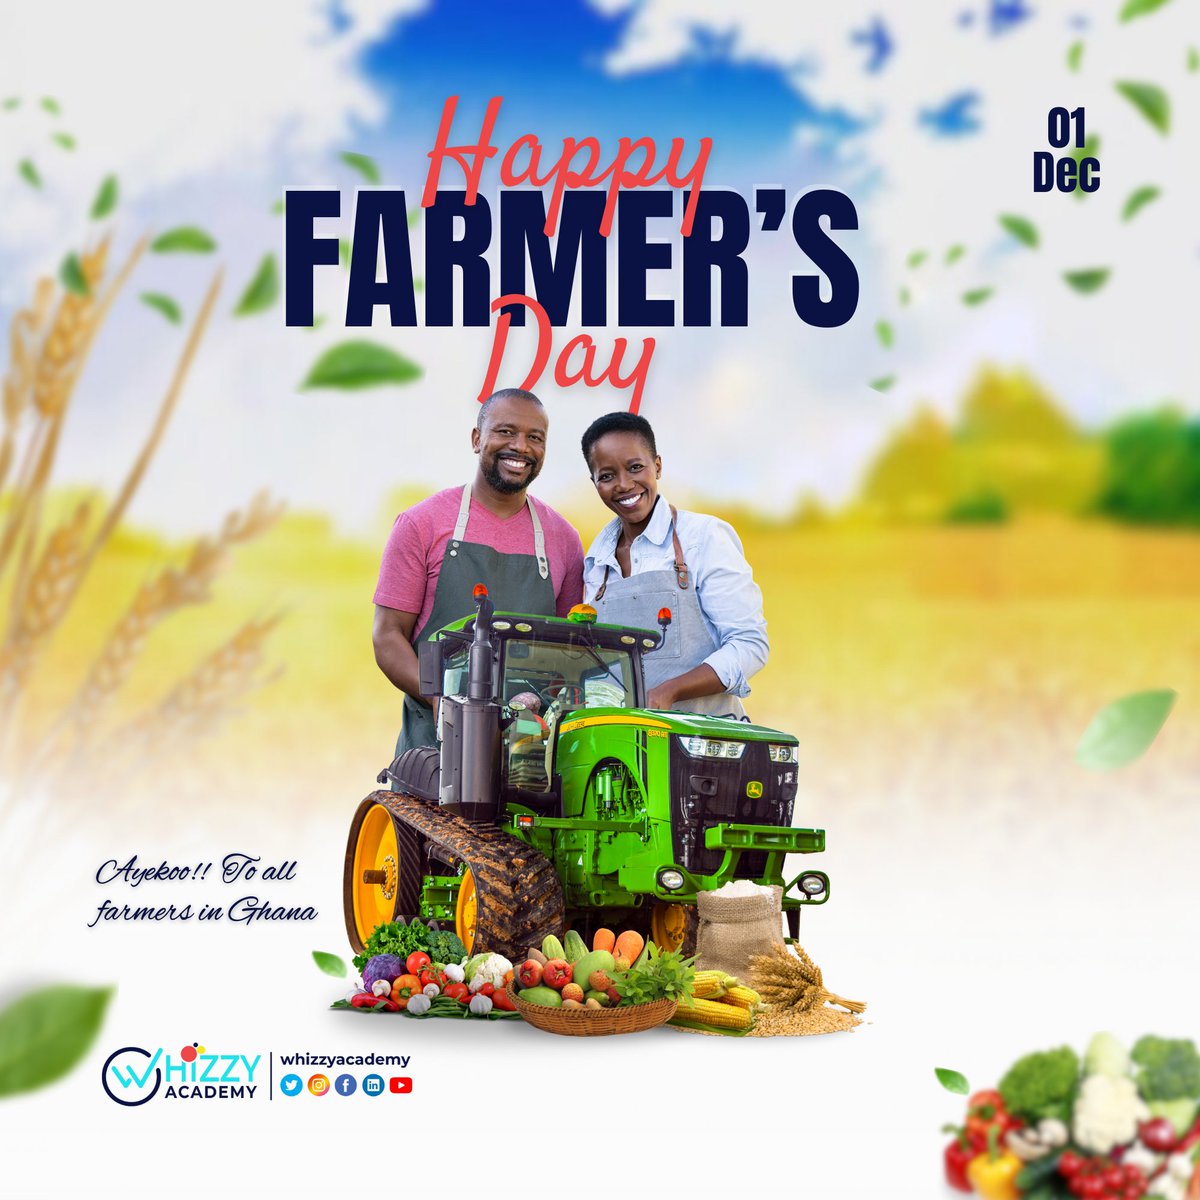 Today, we celebrate the hardworking men and women who tirelessly dedicate themselves to feeding us and our families.**🌱✨ Happy Farmer's Day! 🚜🌾 Join us in the celebration with likes and shares. #WhizzyAcademy #NewMonth #ReduceThePrice #FarmersDay #December2023